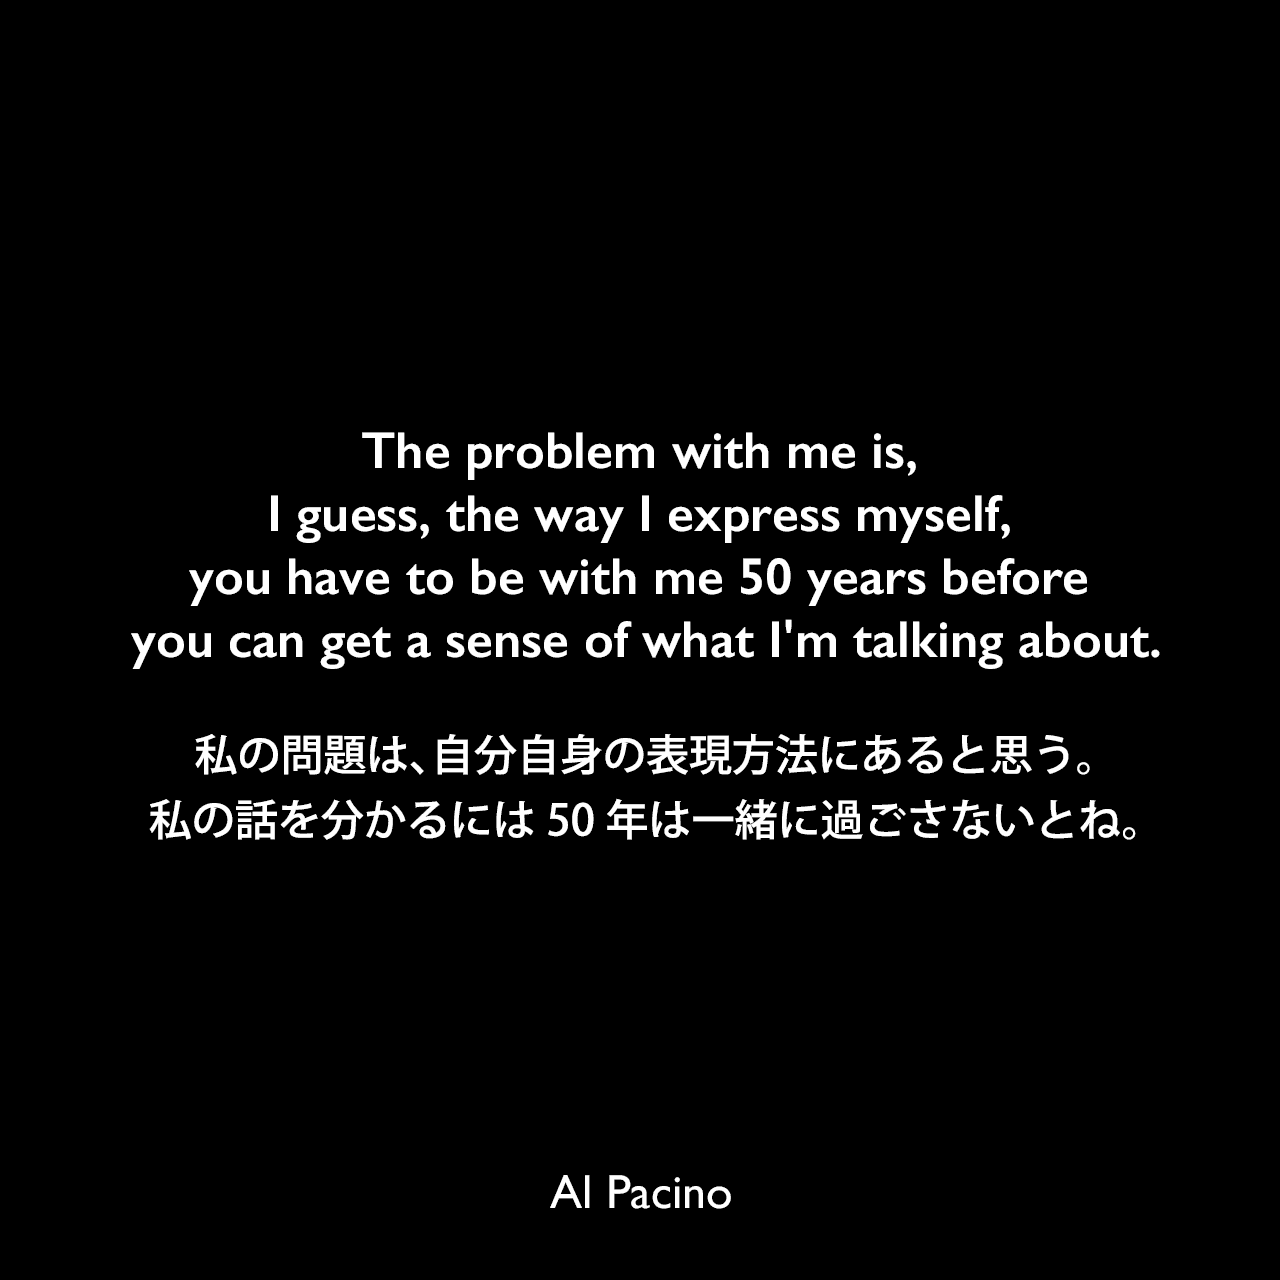 The problem with me is, I guess, the way I express myself, you have to be with me 50 years before you can get a sense of what I'm talking about.私の問題は、自分自身の表現方法にあると思う。私の話を分かるには50年は一緒に過ごさないとね。Al Pacino